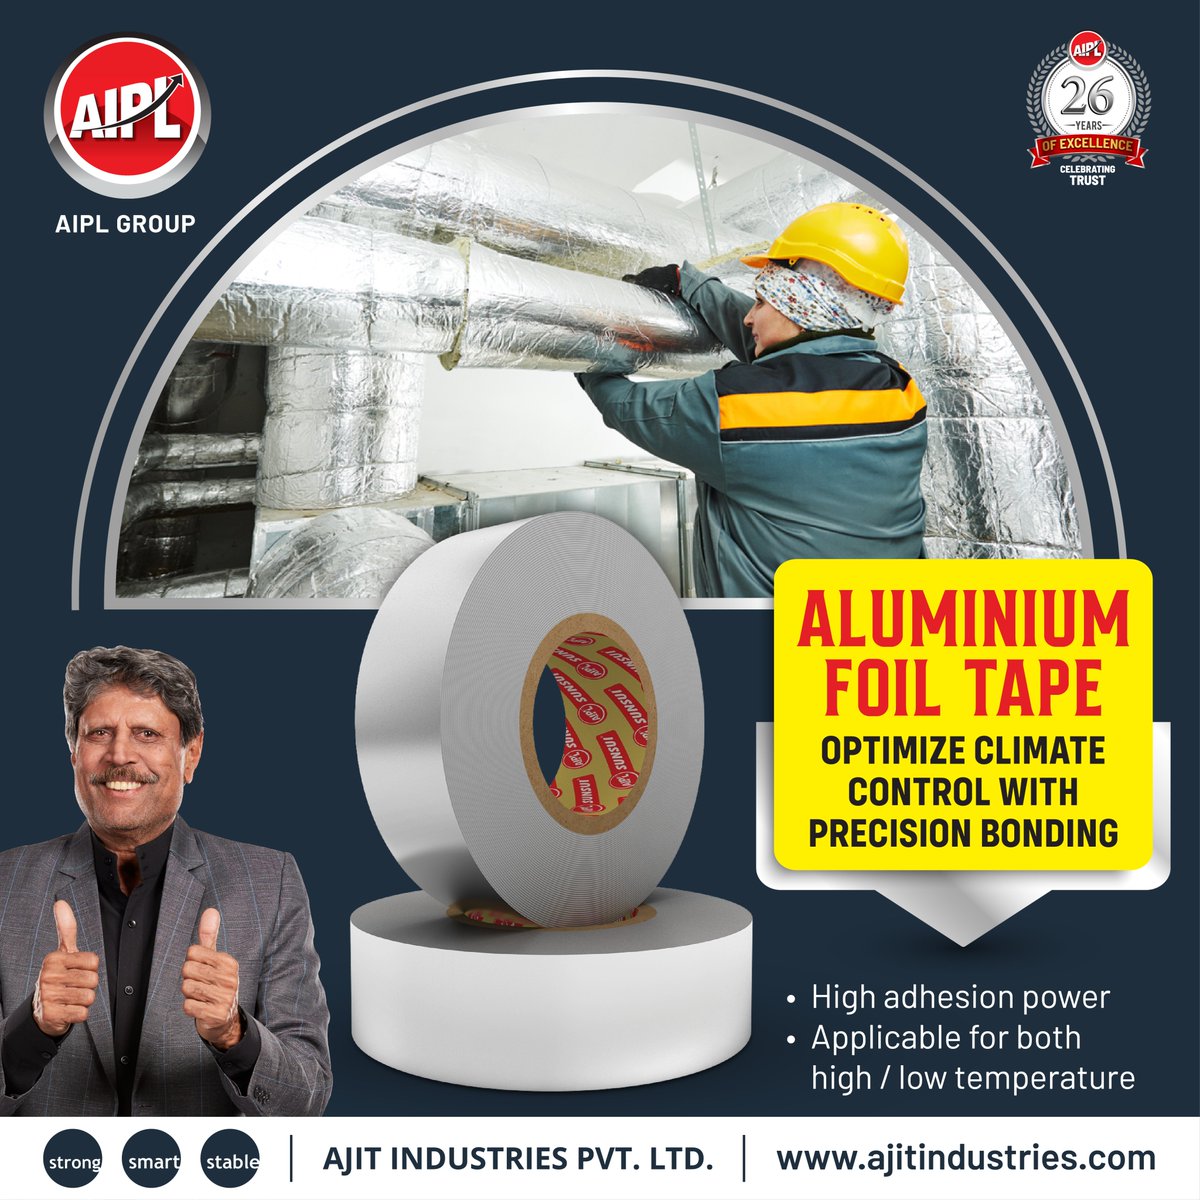 🛠️ From sealing ducts to insulating pipes, this tape is the ultimate ally for efficiency and performance.

#AIPL #AIPLGroup #Ajitindustries #HVAC #Ductwork #Insulation #EnergyEfficiency #Contractors #HomeImprovement #Maintenance #Industrial #AluminiumFoilTape #AIPLTapes